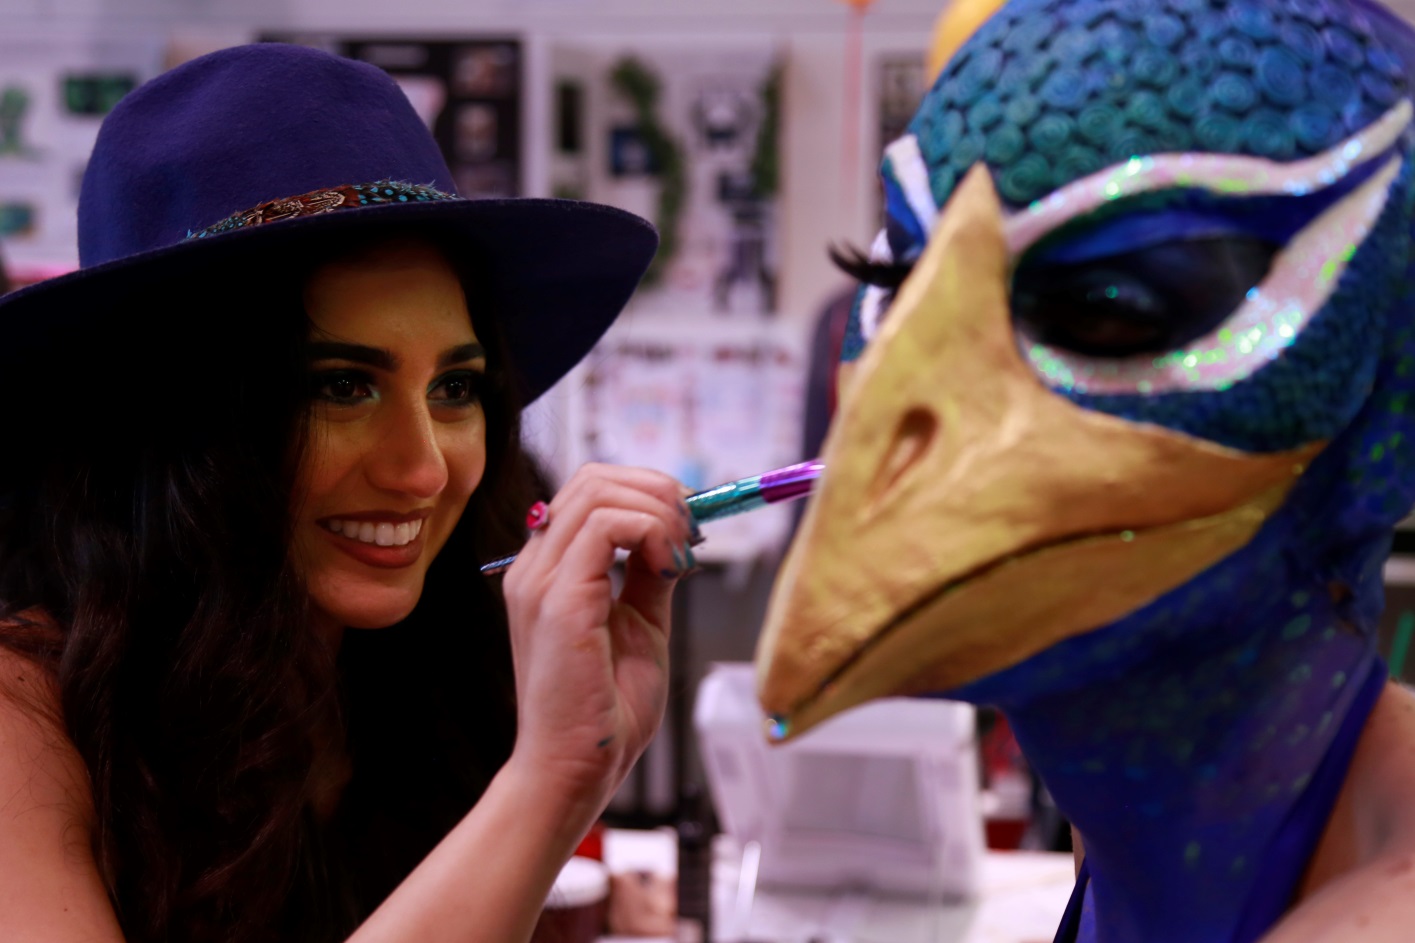 A special effects makeup student paints a bird mask